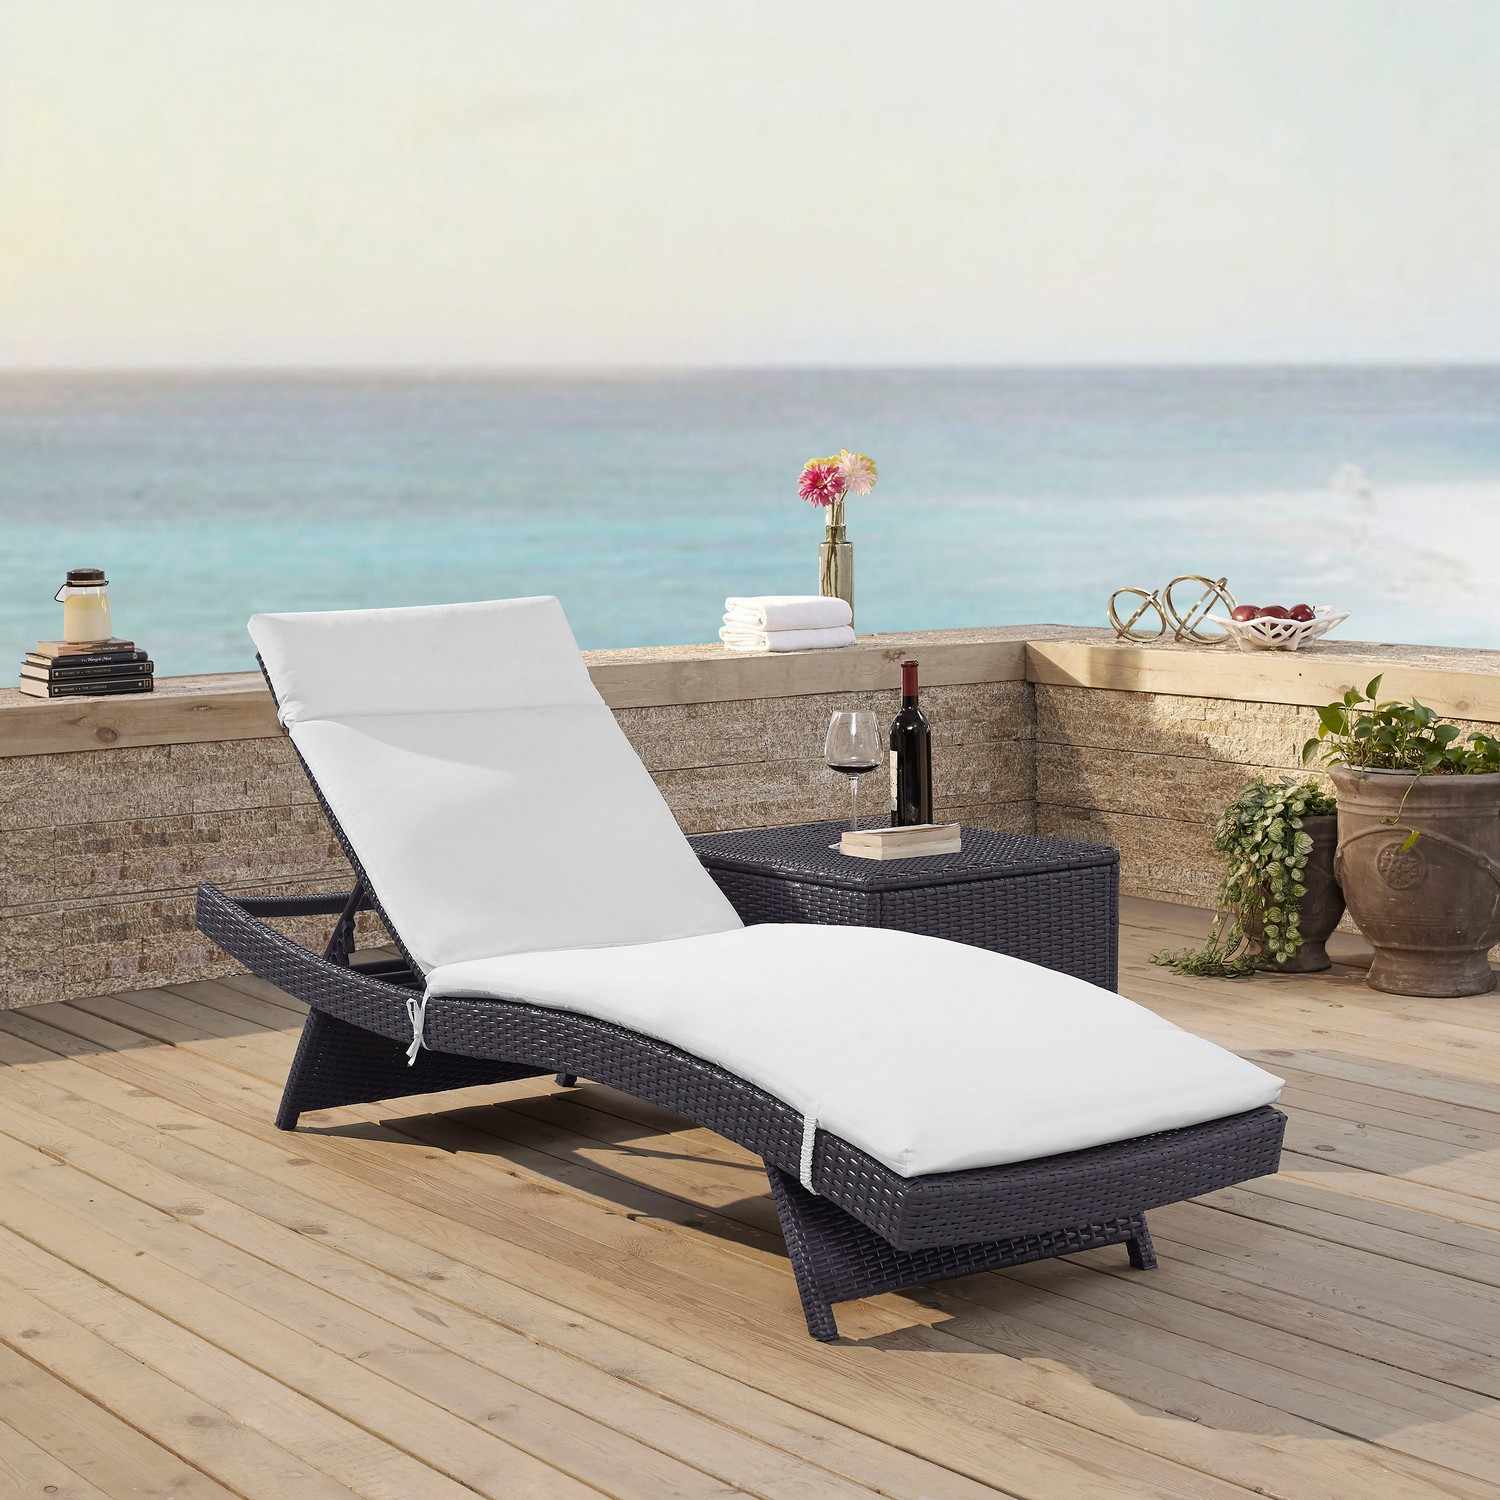 Crosley Biscayne Outdoor Wicker Chaise Lounge - White/Brown